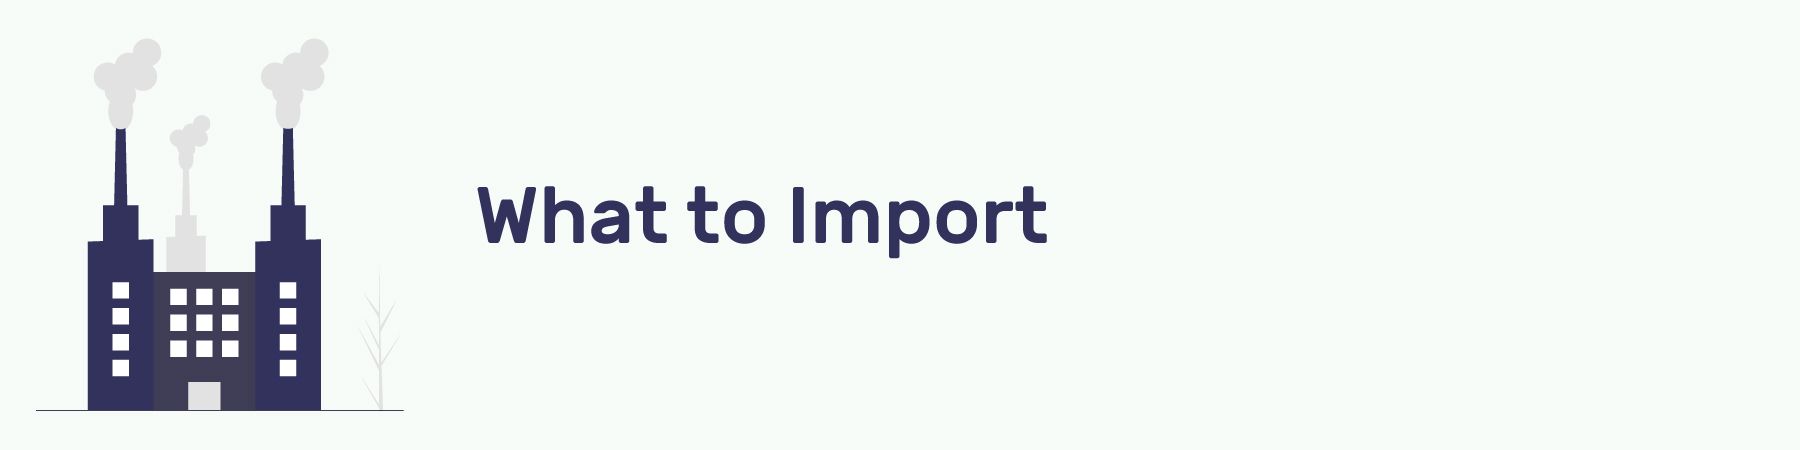 What to Import Section Header